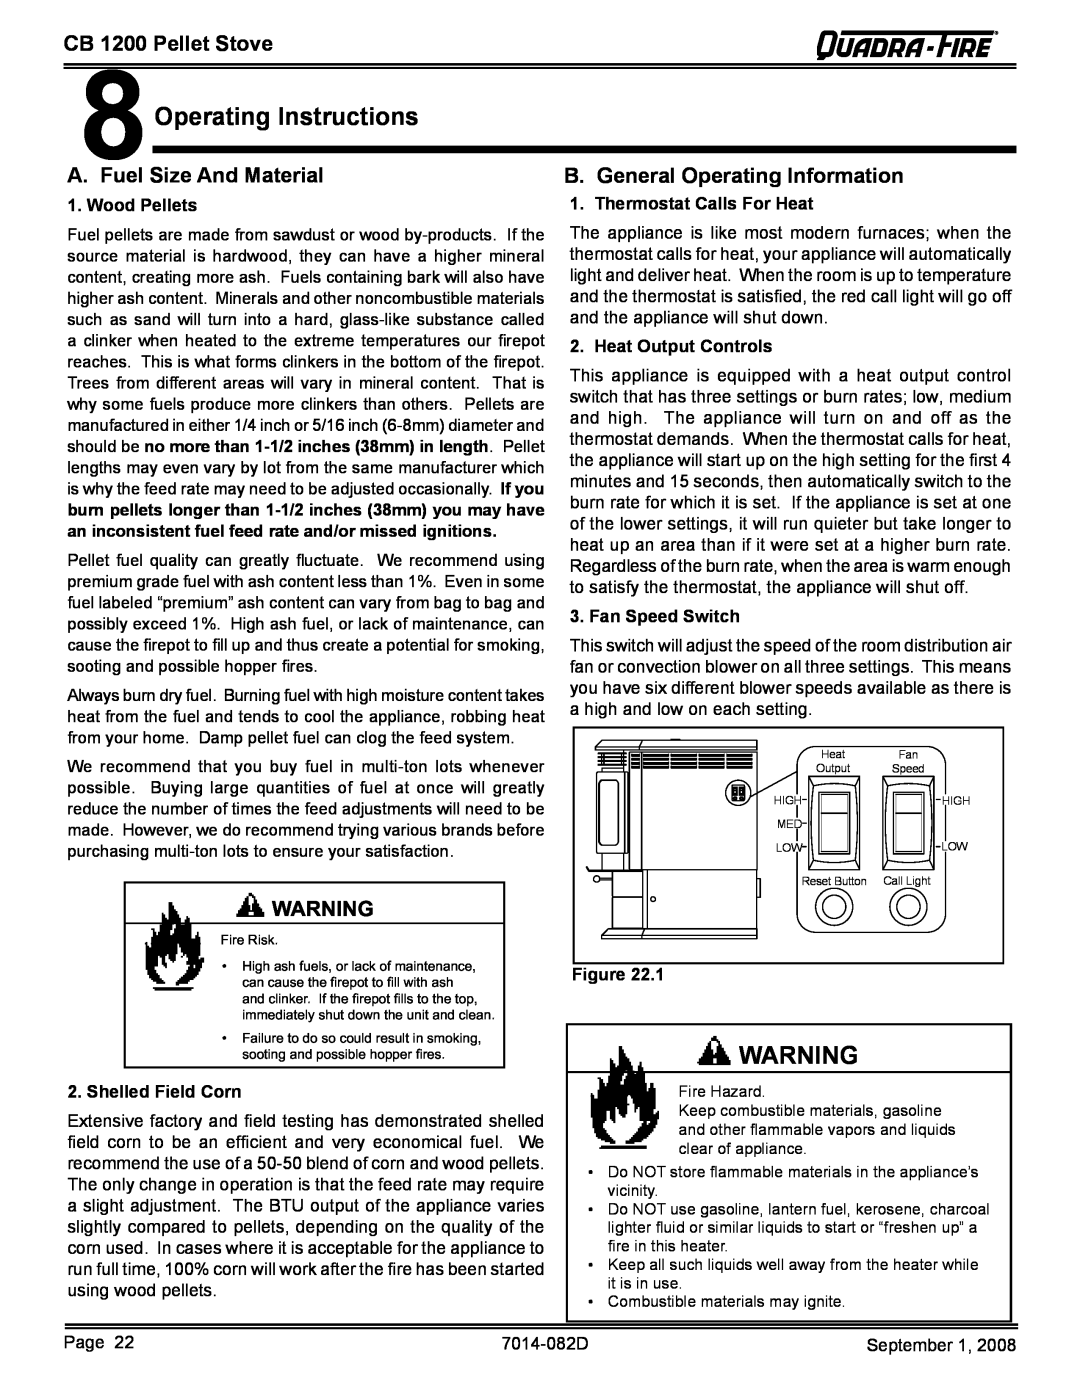 Quadra-Fire CB1200-B Operating Instructions, Fuel Size And Material, B. General Operating Information, Wood Pellets 